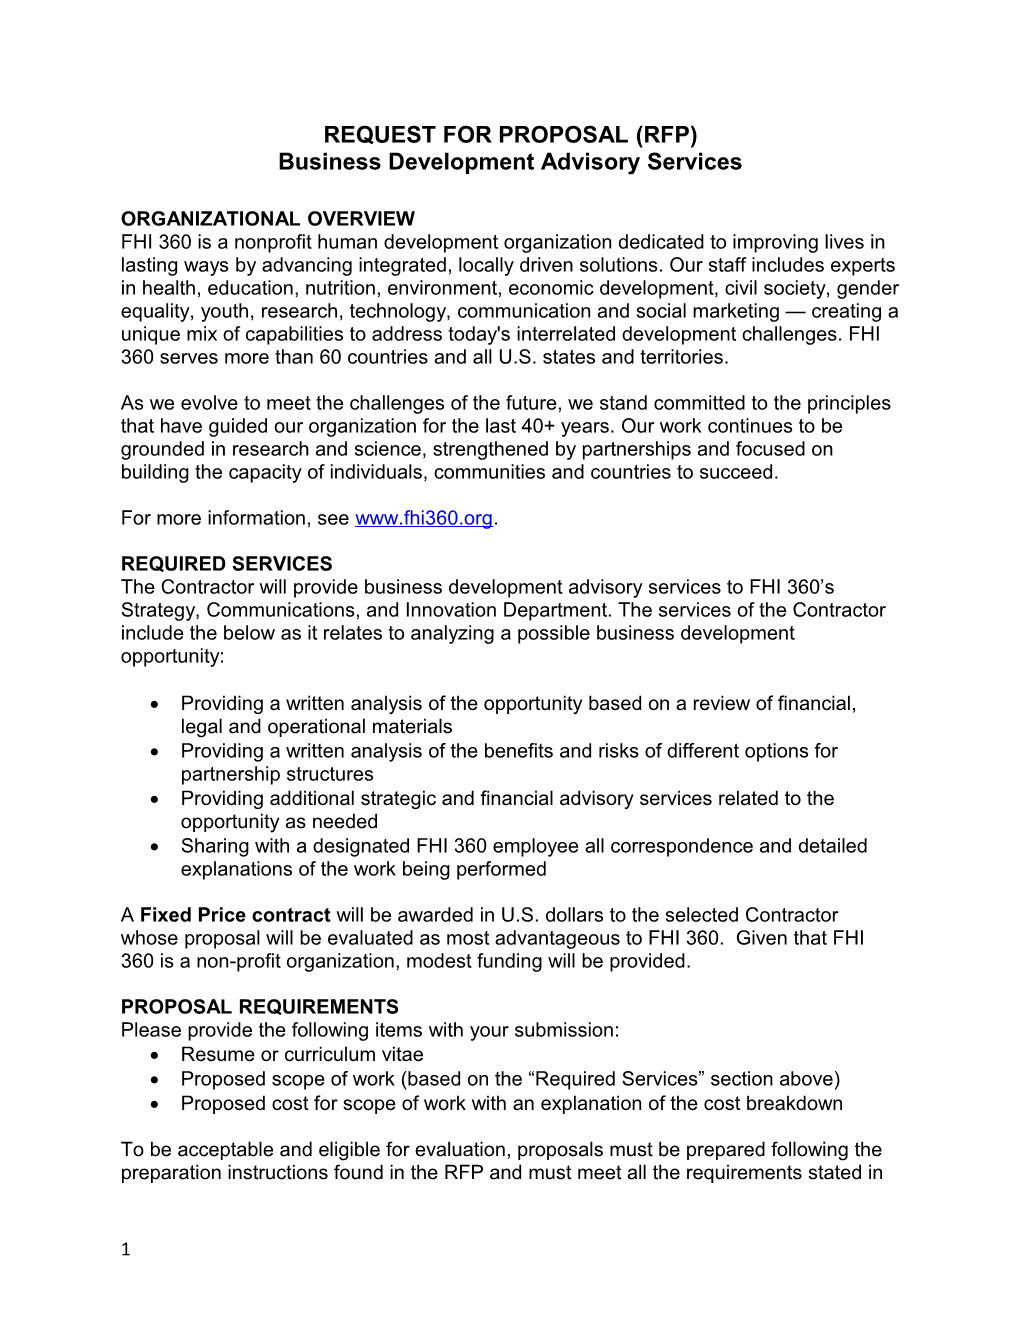 REQUEST for PROPOSAL (RFP) Business Development Advisoryservices